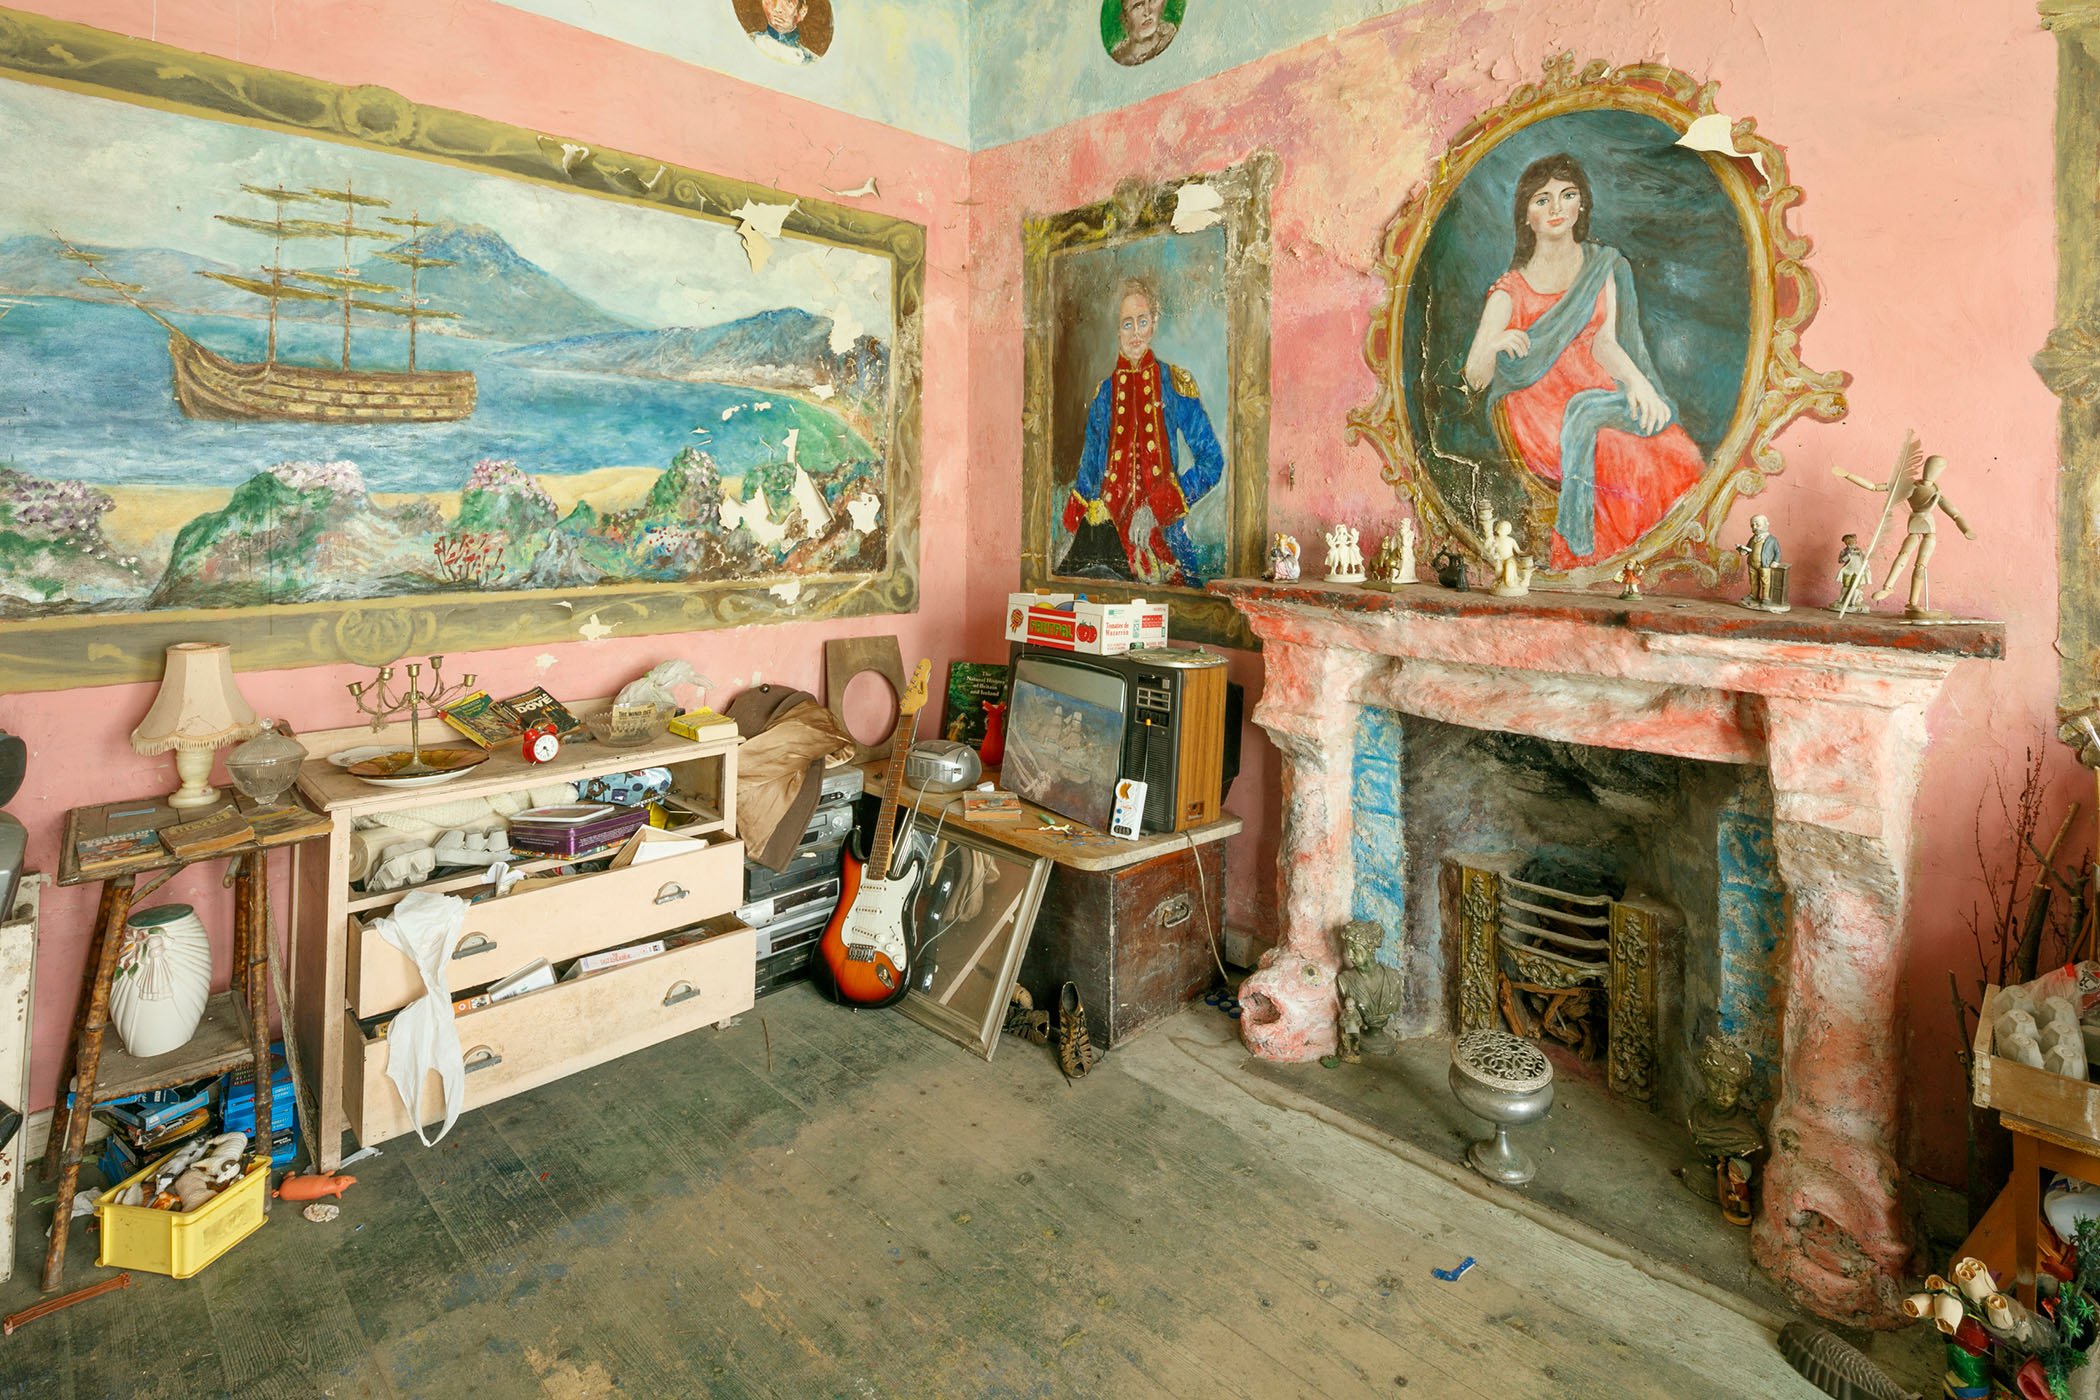 A photograph of a room containing an old fireplace, and wall paintings of two figures within decorative frames and a ship within a coastal setting.